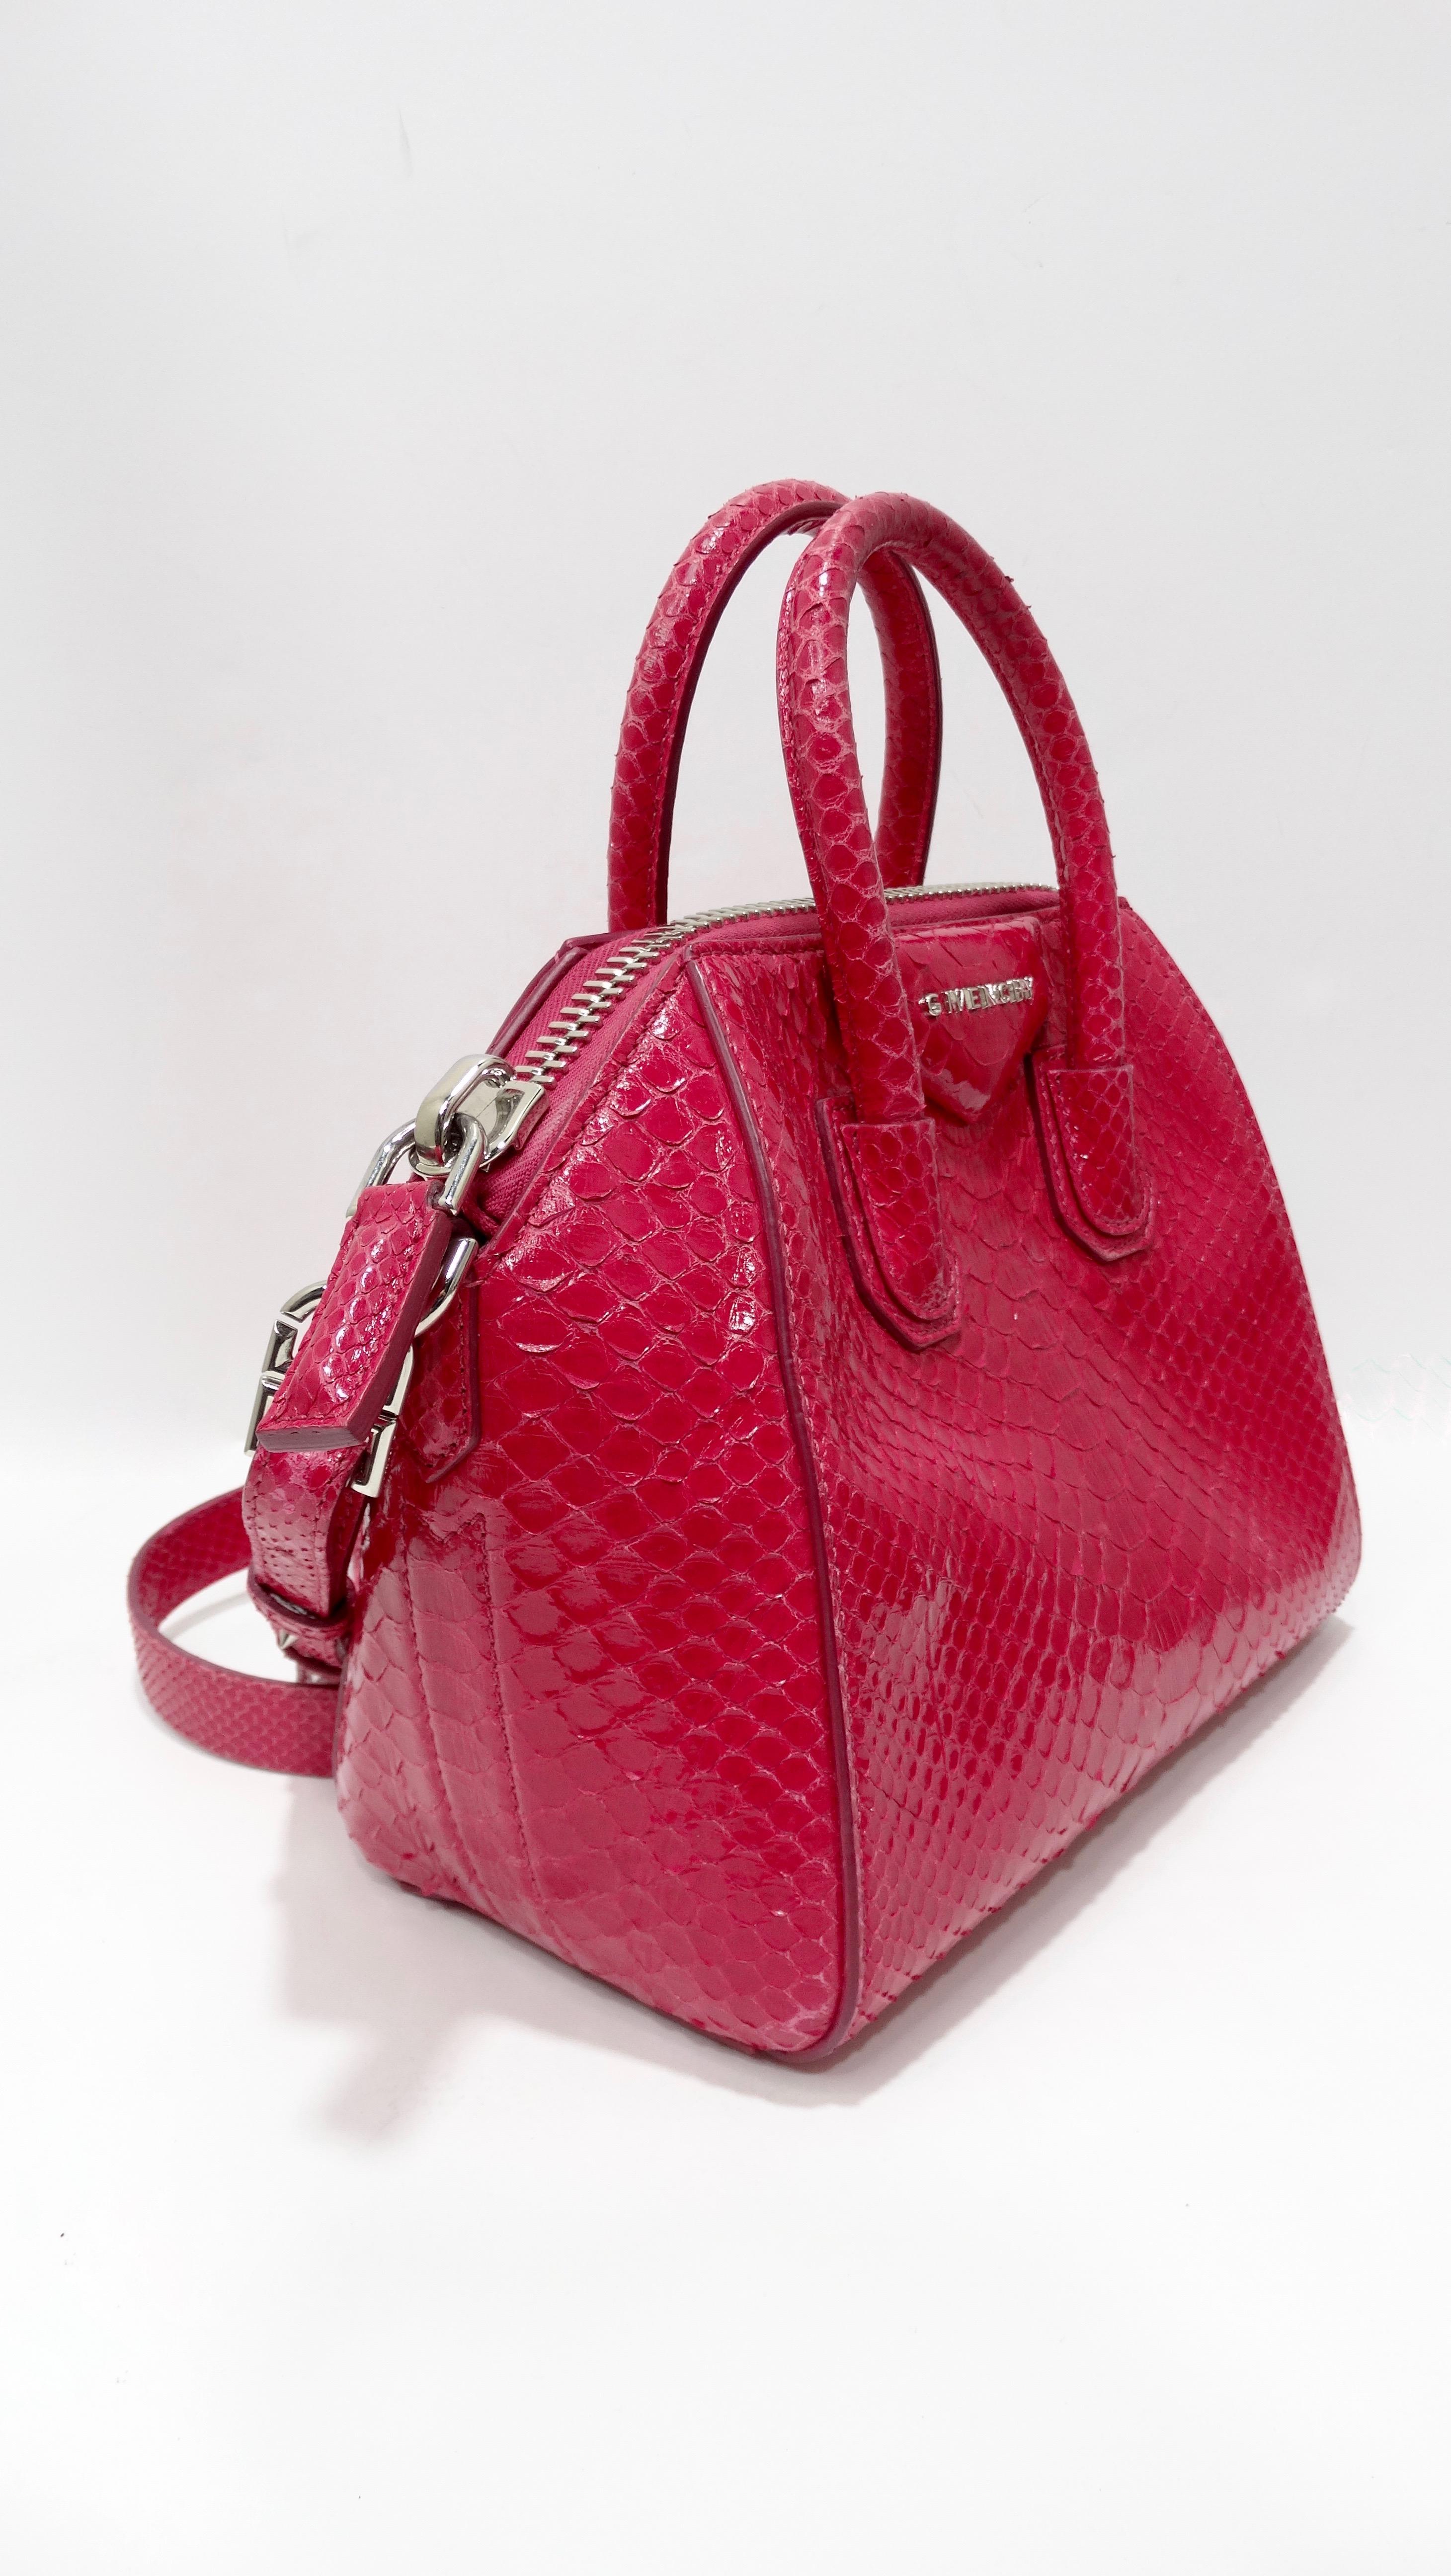 Add some color to your looks with this amazing Givenchy Antigona bag! Circa 2011, this rare bag is beautifully crafted from laminated python and finished in vibrant hot pink. Features structured sides, dual rolled top handles, removable flat